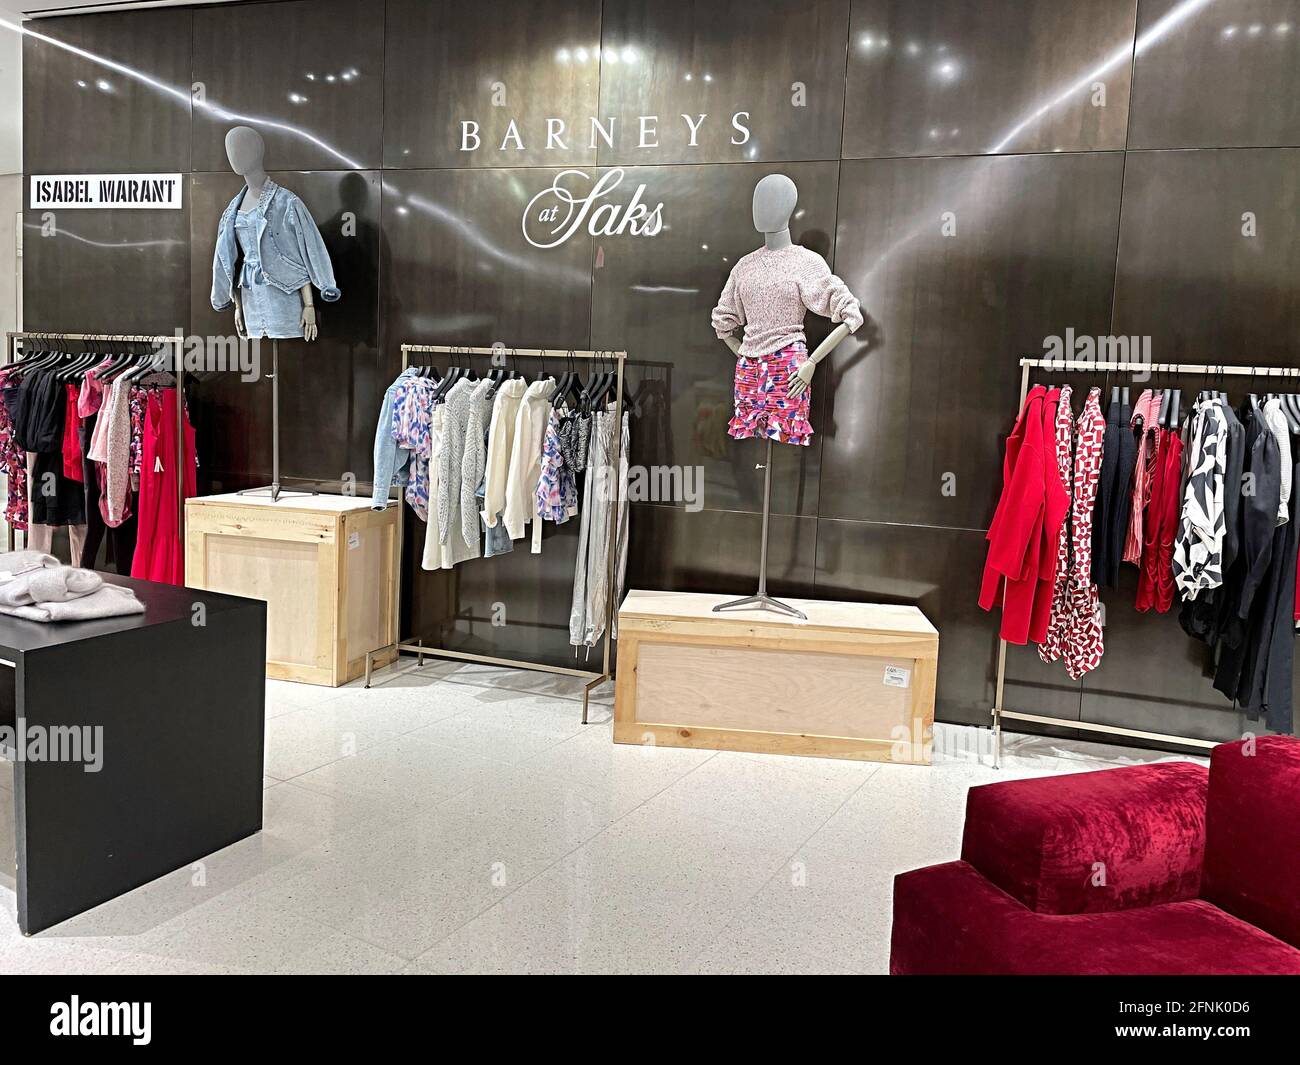 Barneys at the Saks Avenue Flagship Store in New York USA 2021 Photo - Alamy